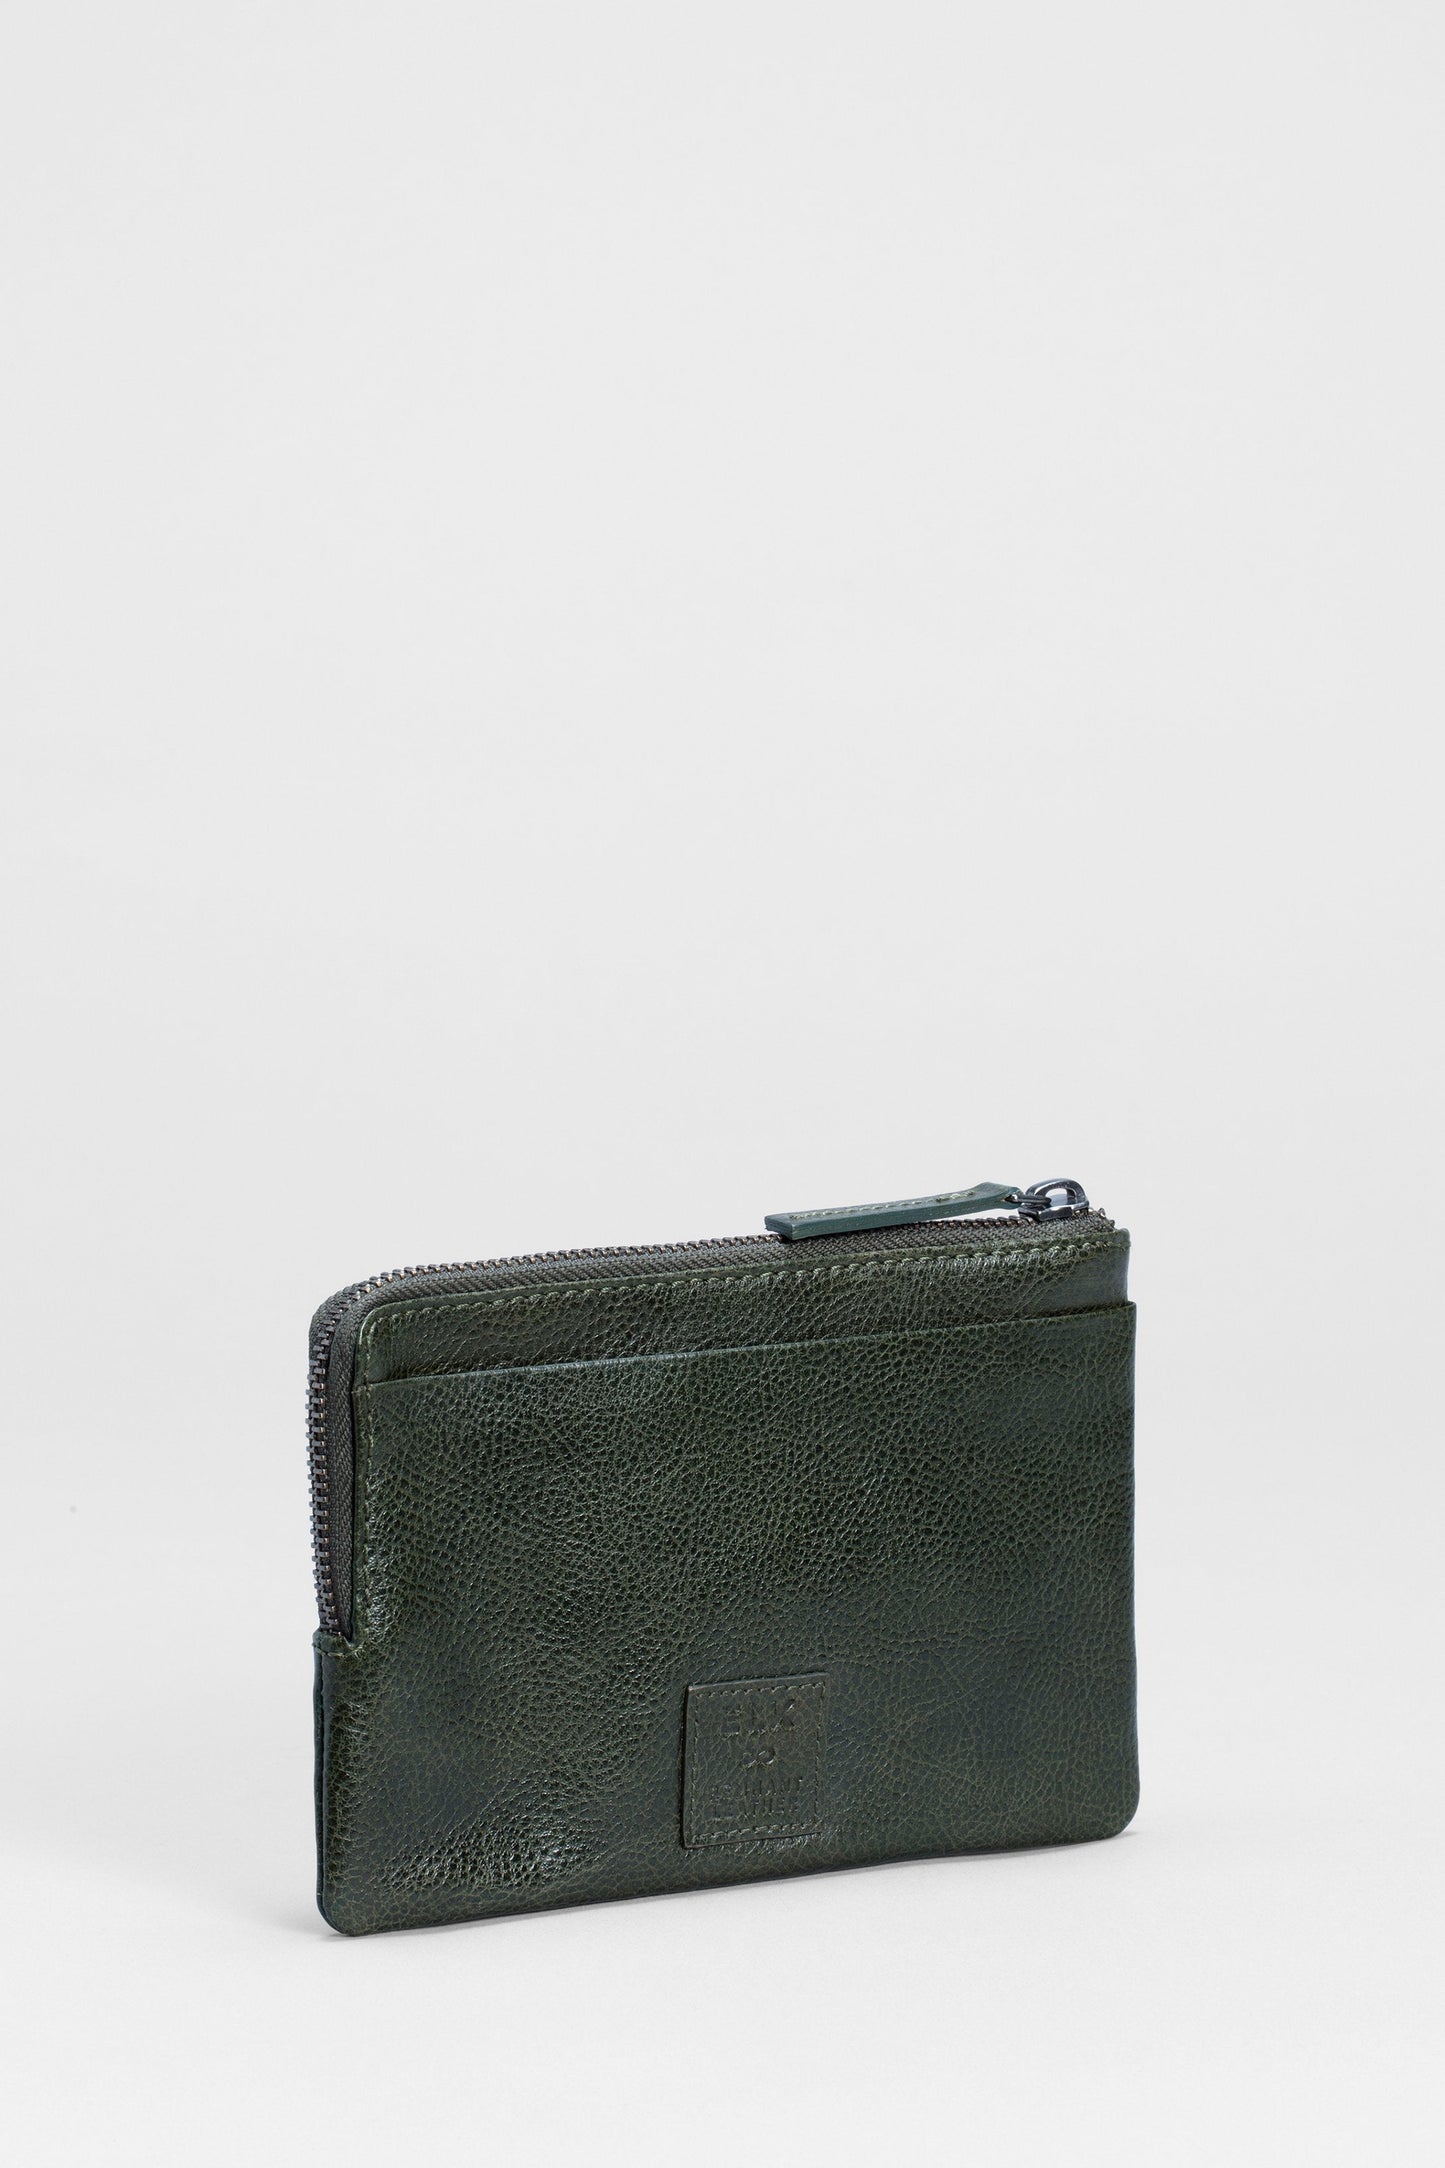 Kaia Zip Remnant Cow Leather Coin Purse Pouch Back | OLIVE